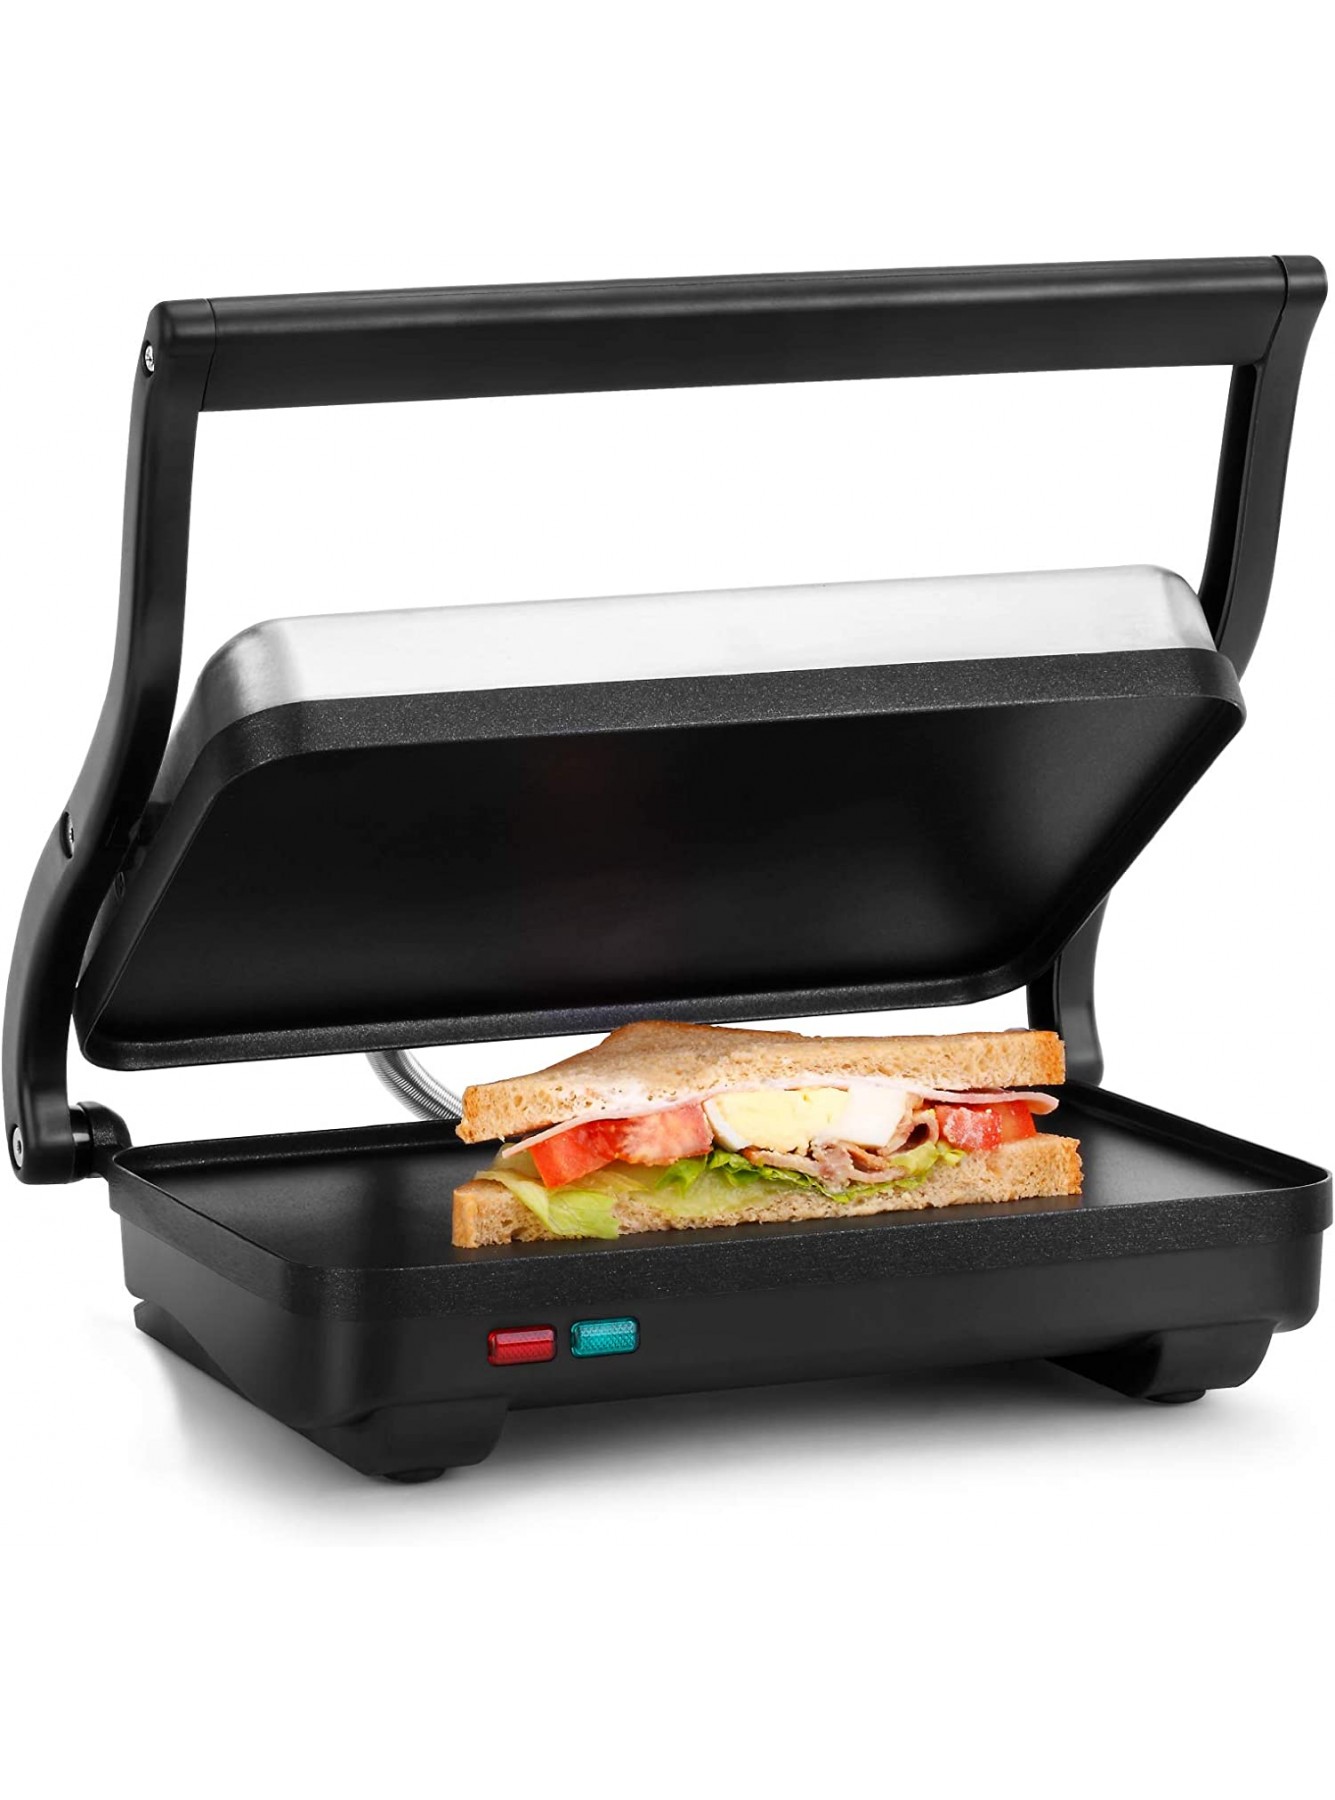 Holstein Housewares Non-Stick Panini Press Electric Griddle for Toasting Sandwiches and Various Snacks Black Stainless Steel 260 x 170mm B013777AF0